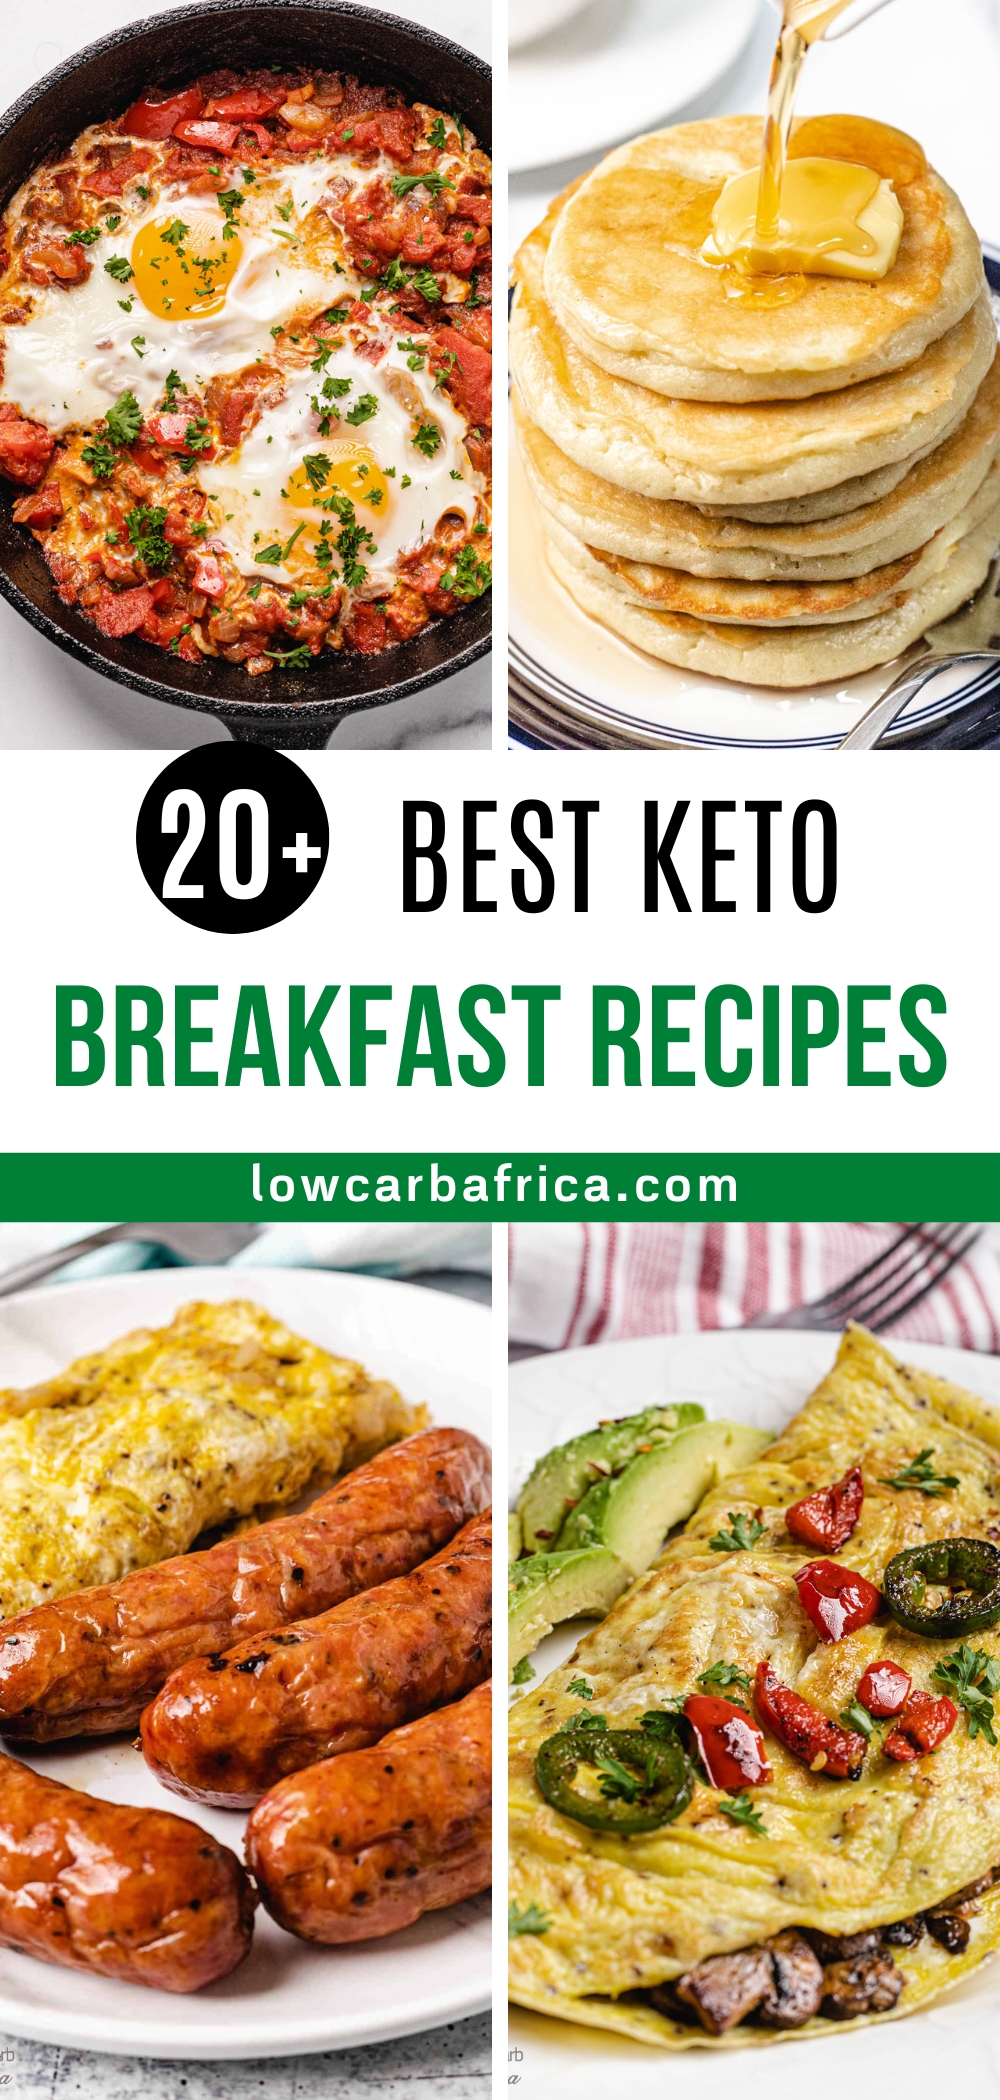 25 Best Keto Breakfast Recipes - Low Carb Africa